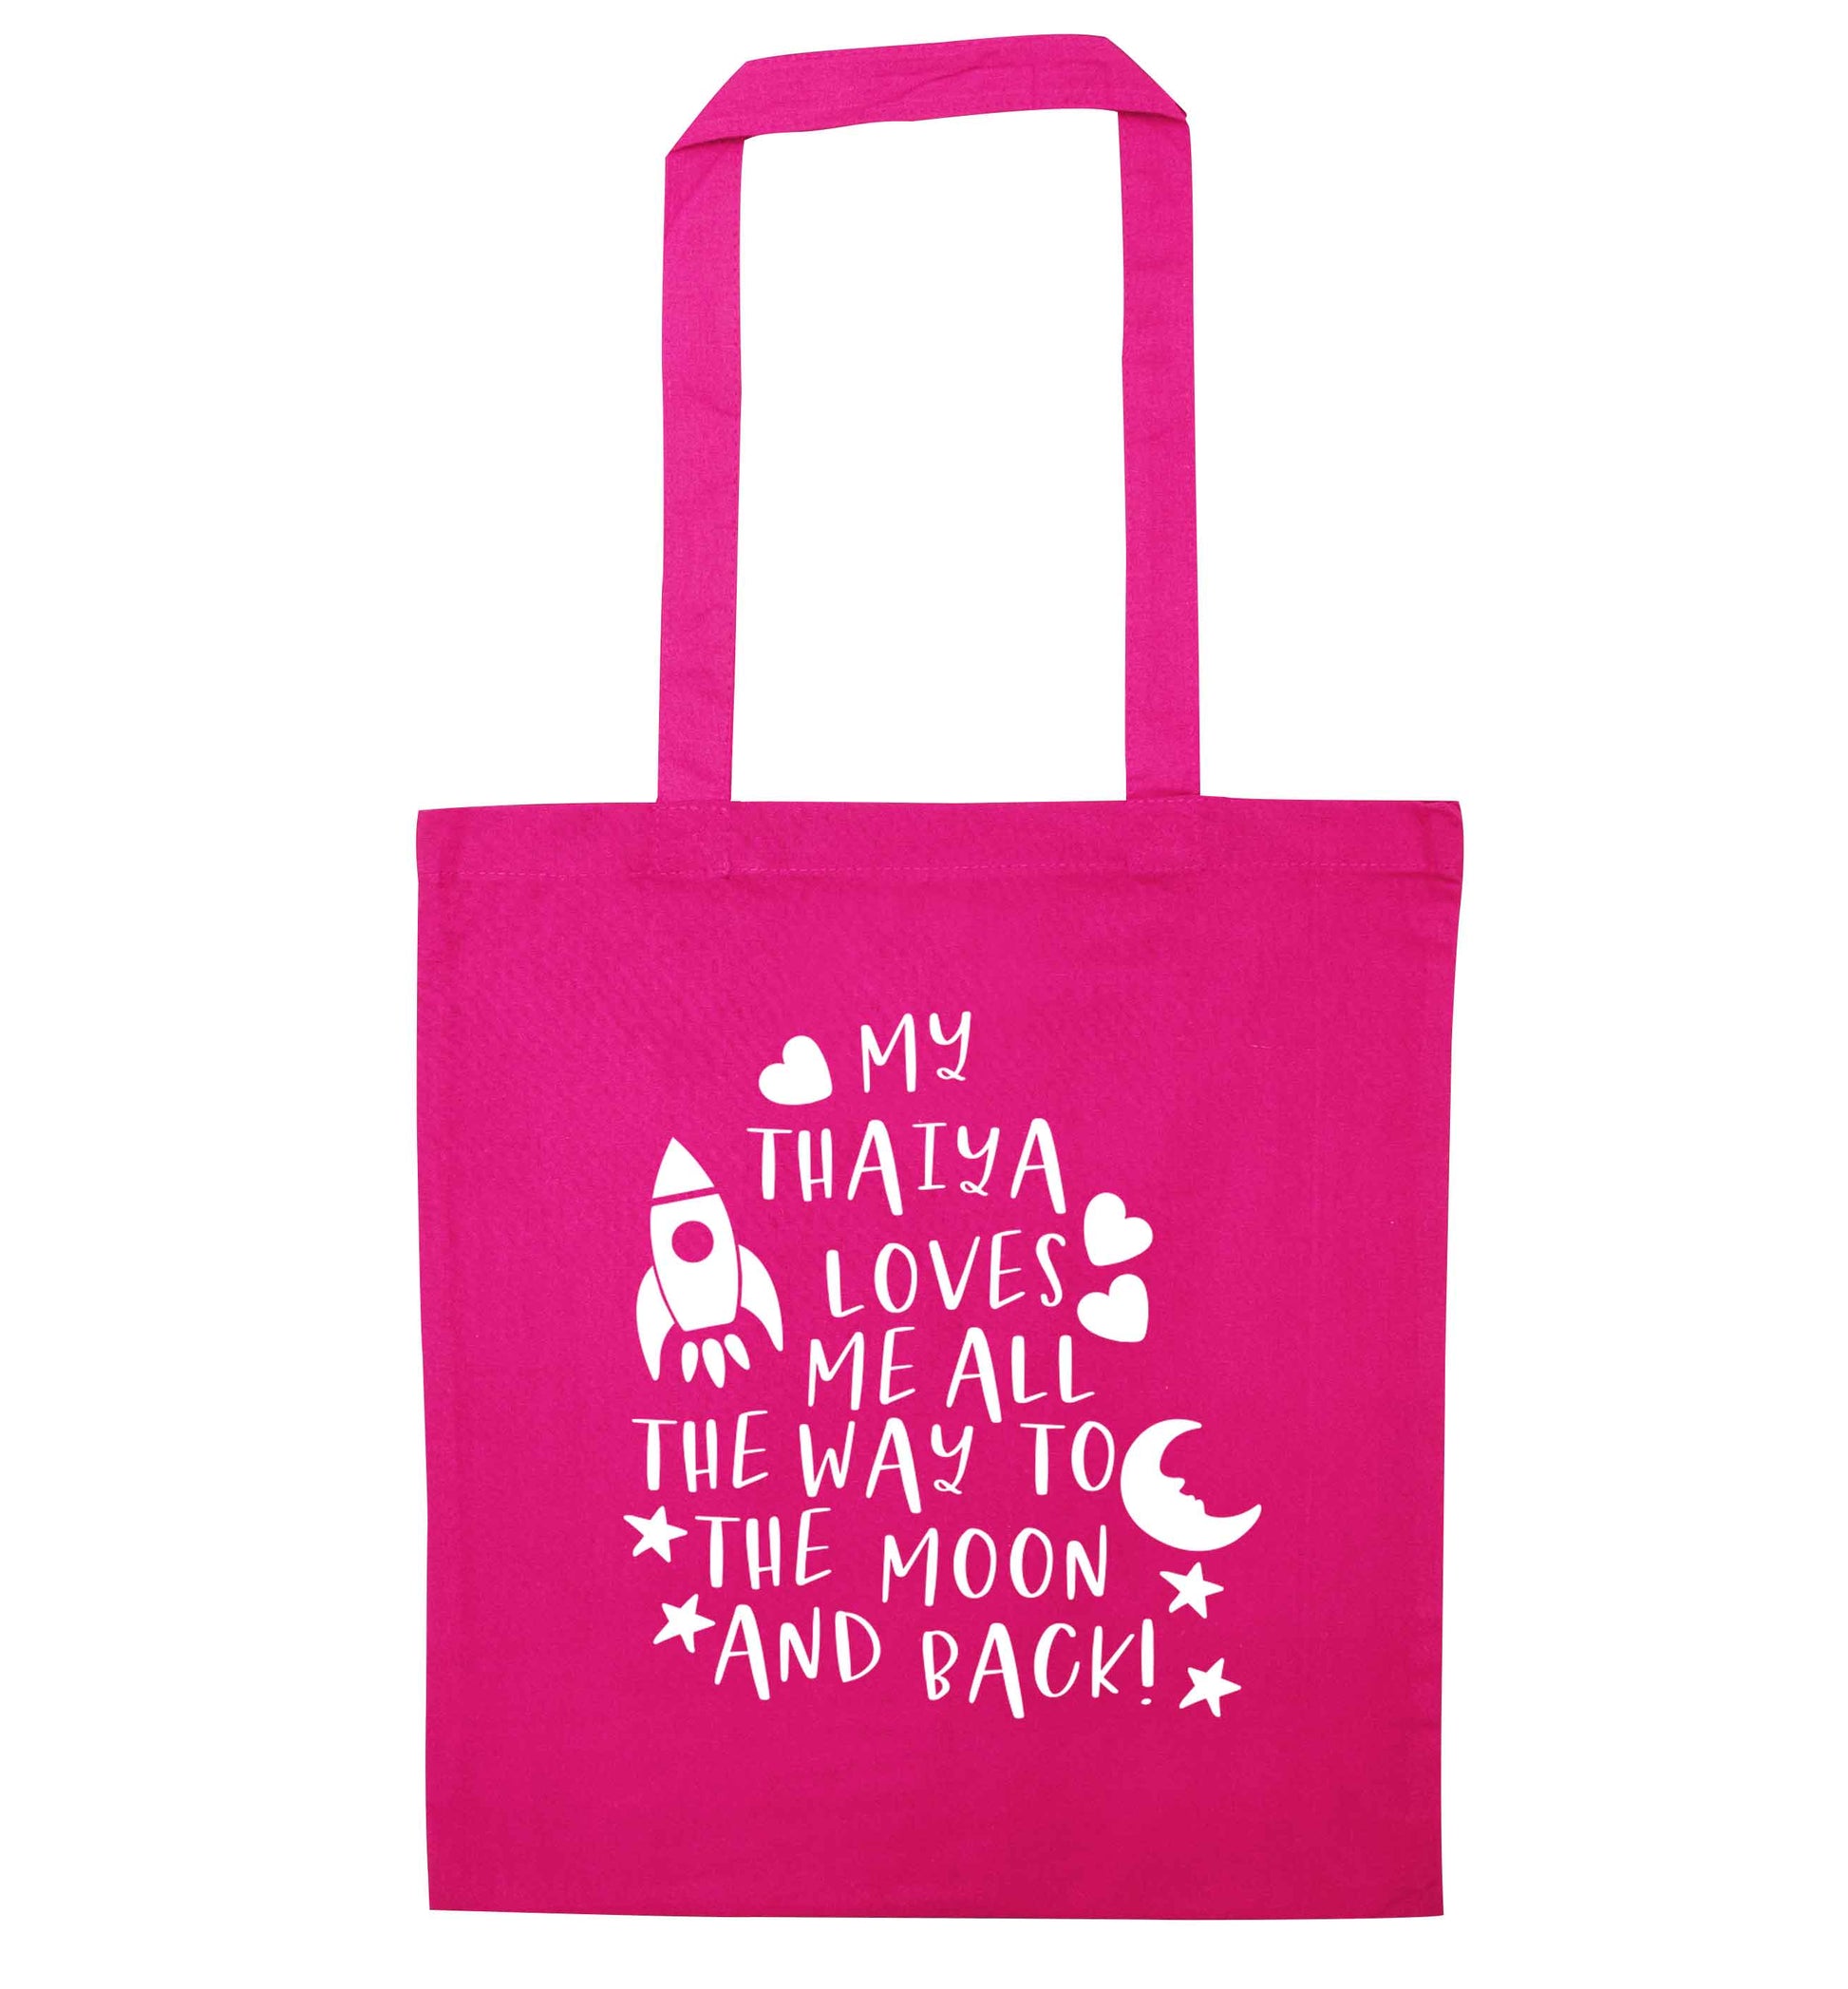 My thaiya loves me all the way to the moon and back pink tote bag